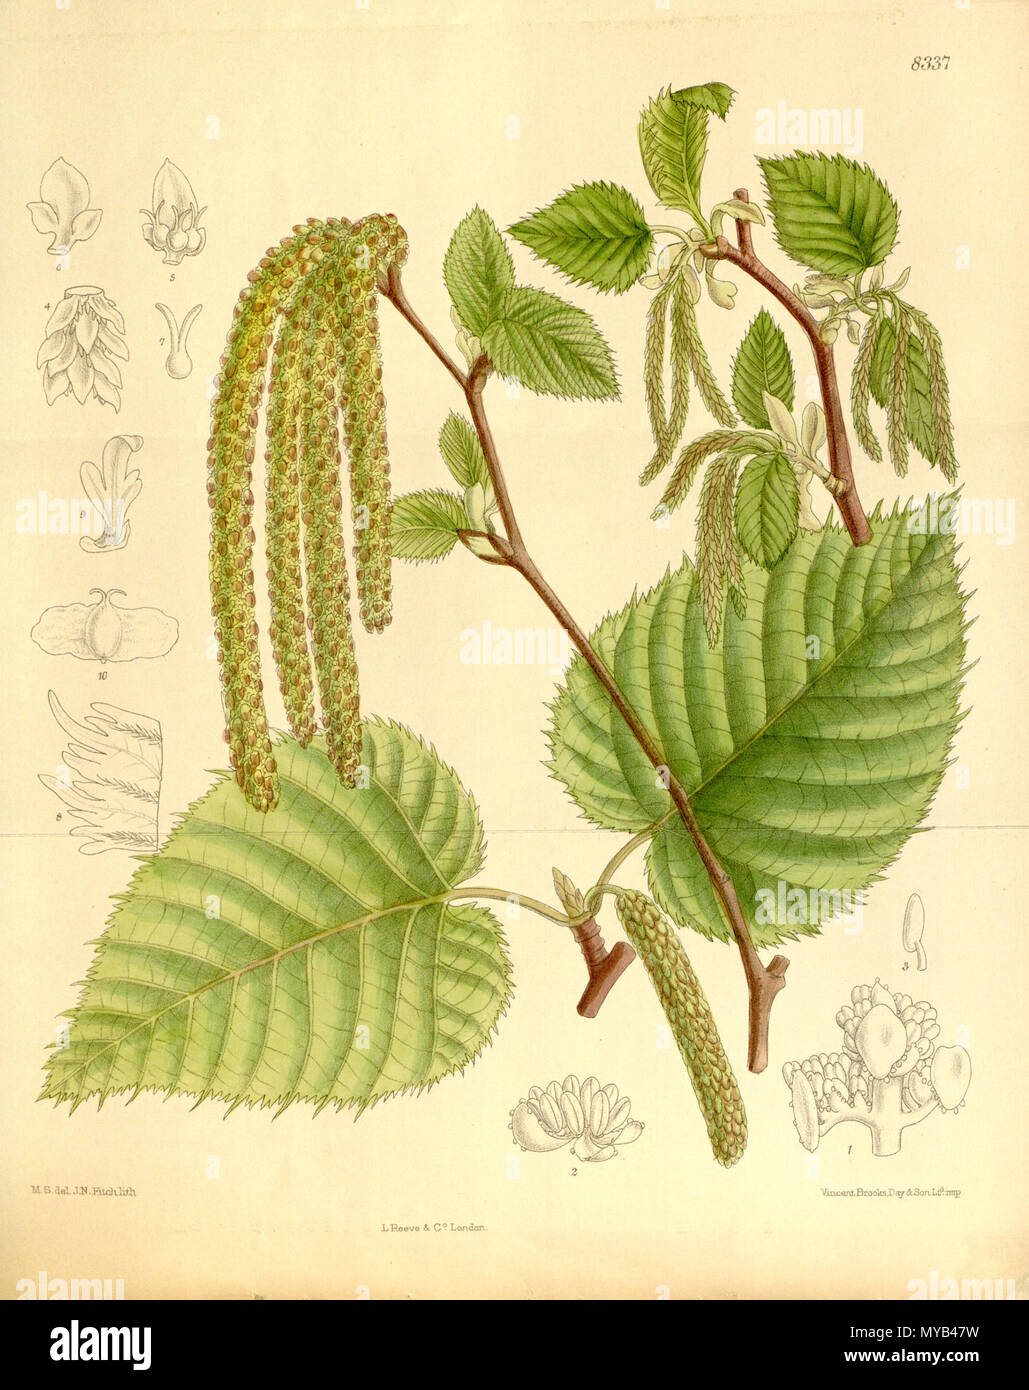 . Betula maximowiczii (= Betula maximowicziana), Betulaceae . 1910. M.S. del., J.N.Fitch lith. 73 Betula maximowiczii 136-8337 Stock Photo